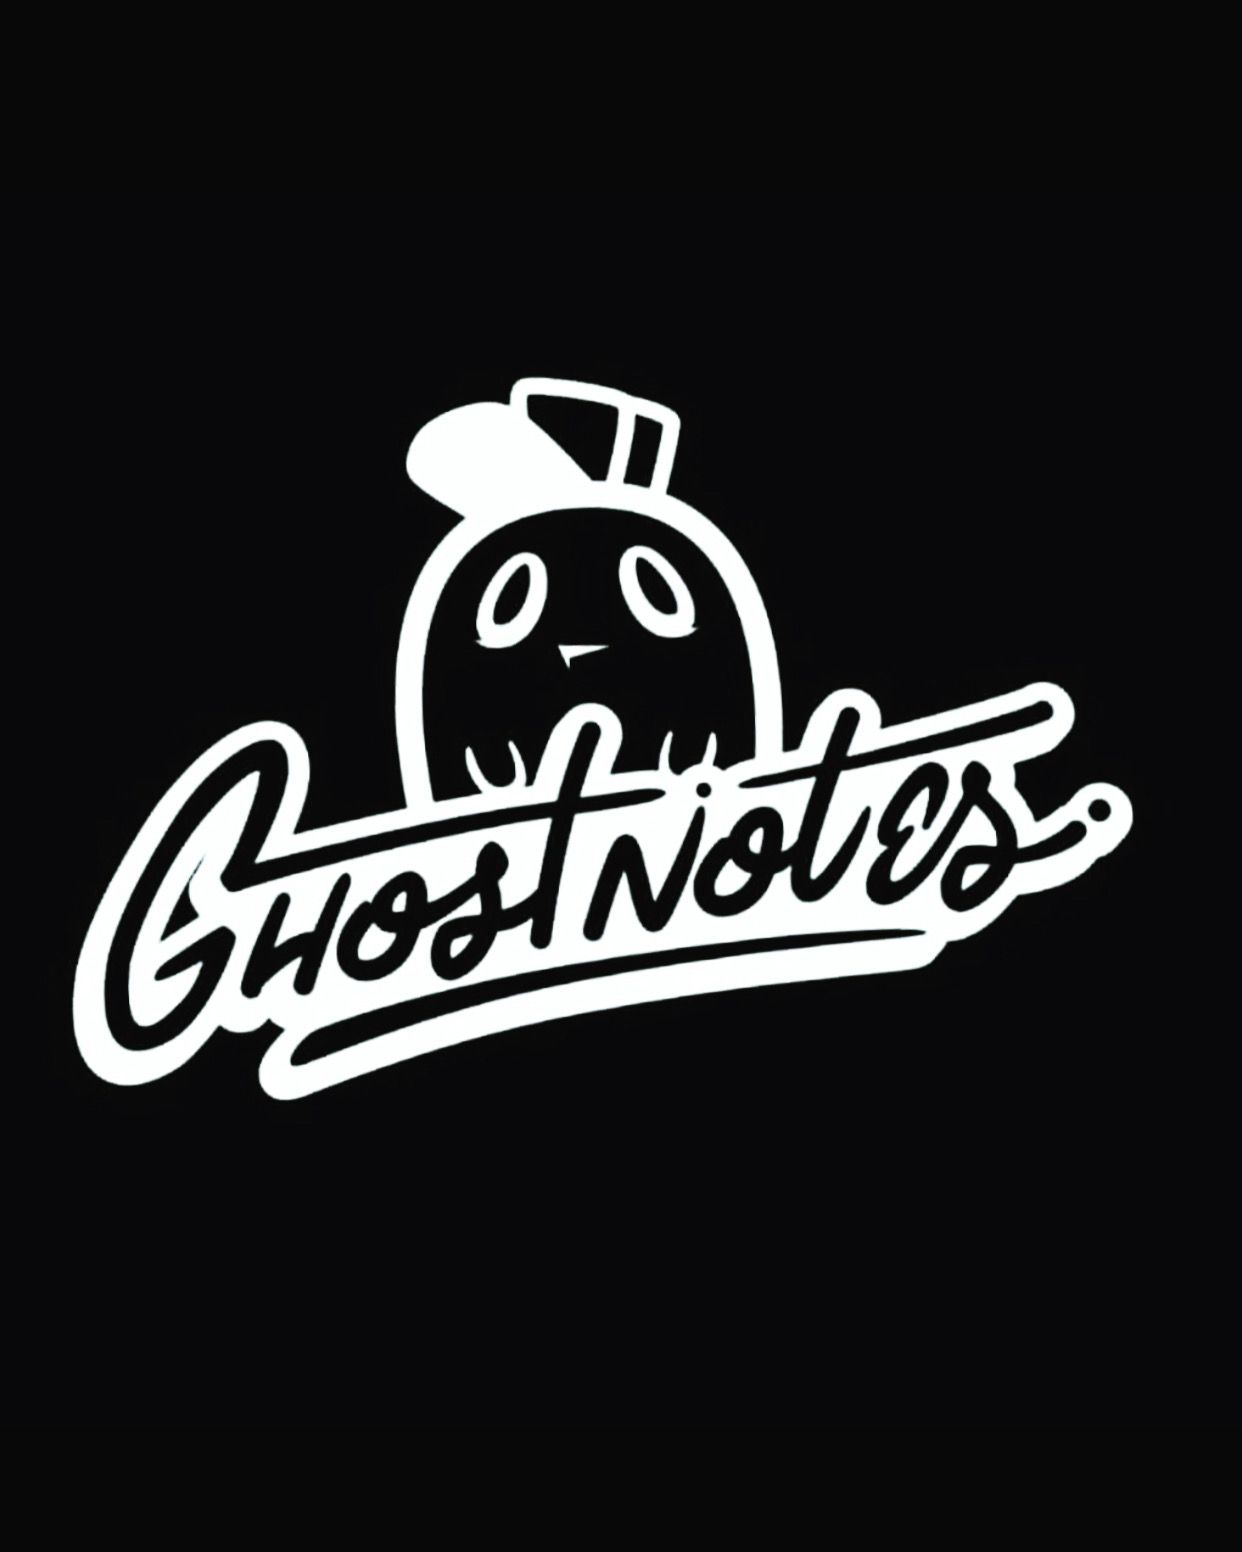 GhostNotes's profile image